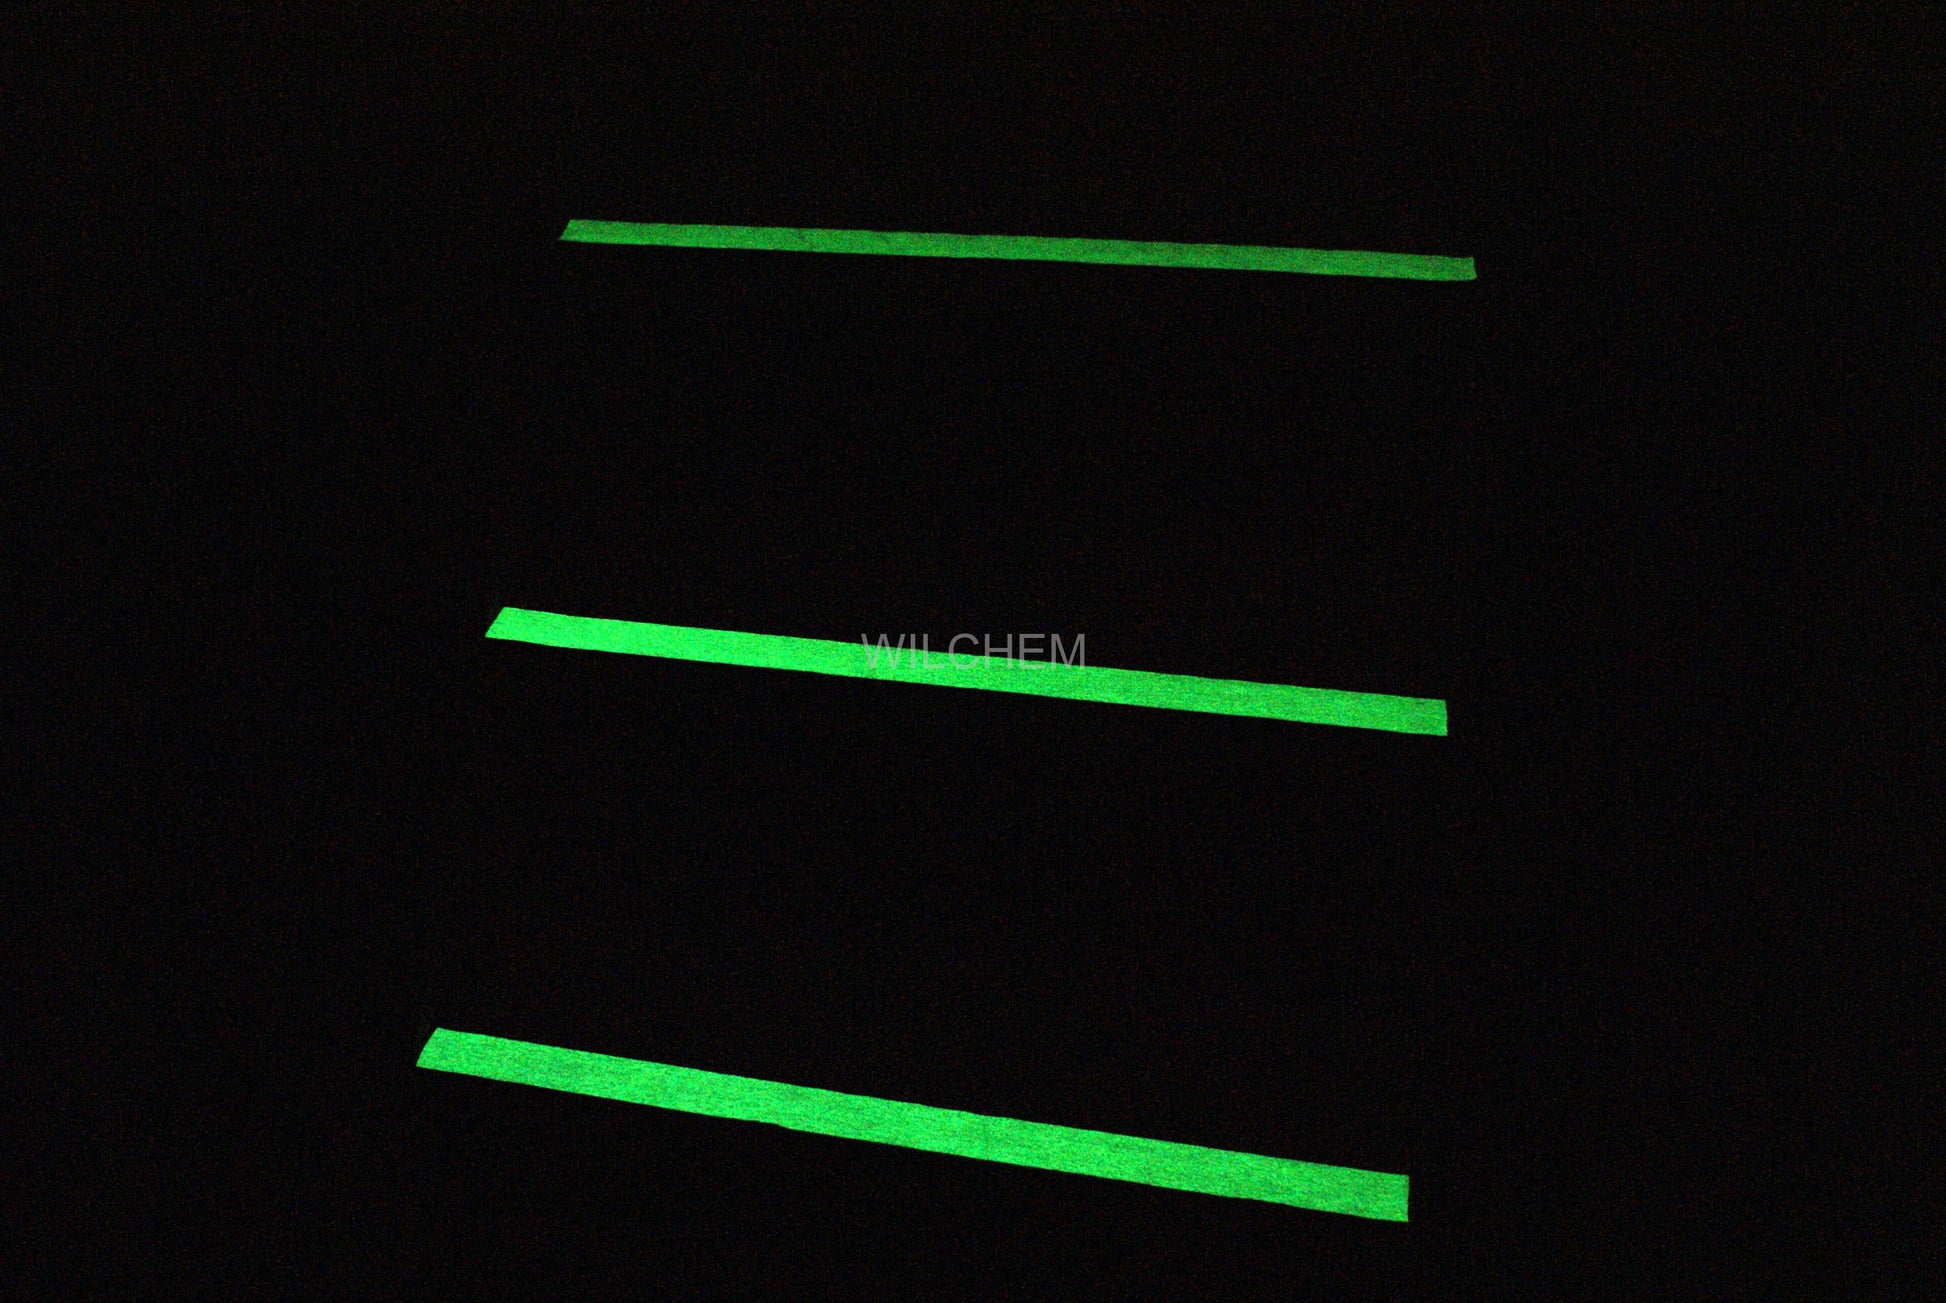  For areas that can be tricky to navigate in low light or light-out situations, applying glow-in-the-dark safety tape can help illuminate the area, allowing you to quickly, calmly, and safely navigate them in time of need. All steps and platforms, if applicable, can be highlighted.